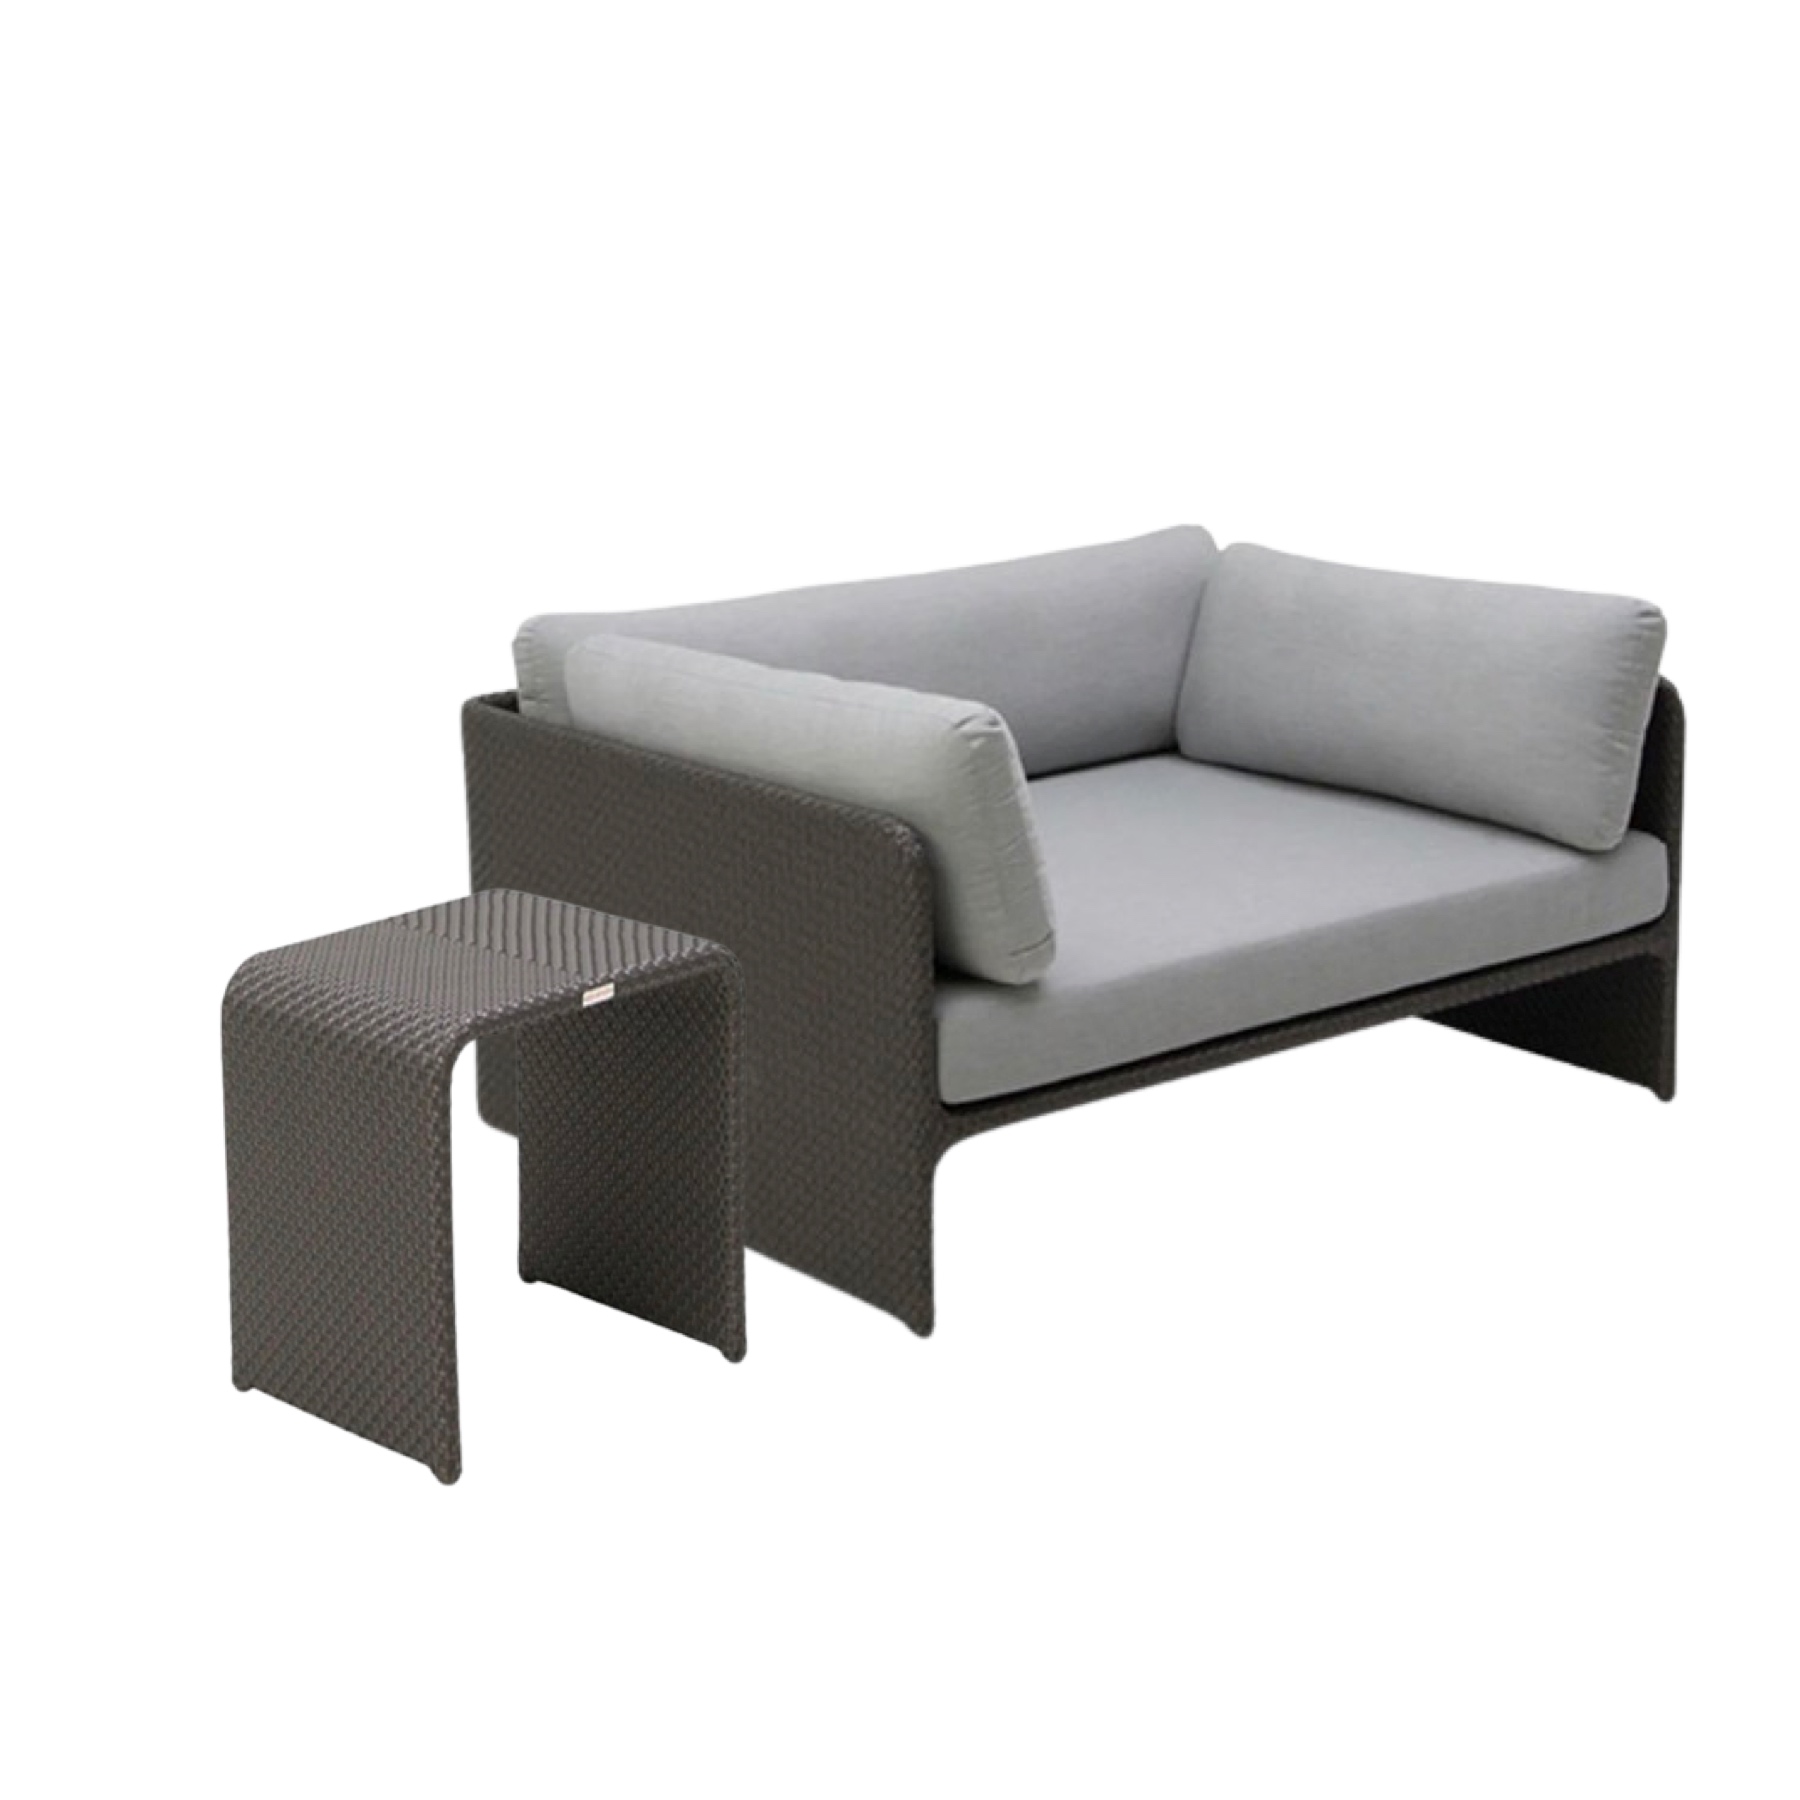 C-TRO20001a OHMM® Horizon Daybed